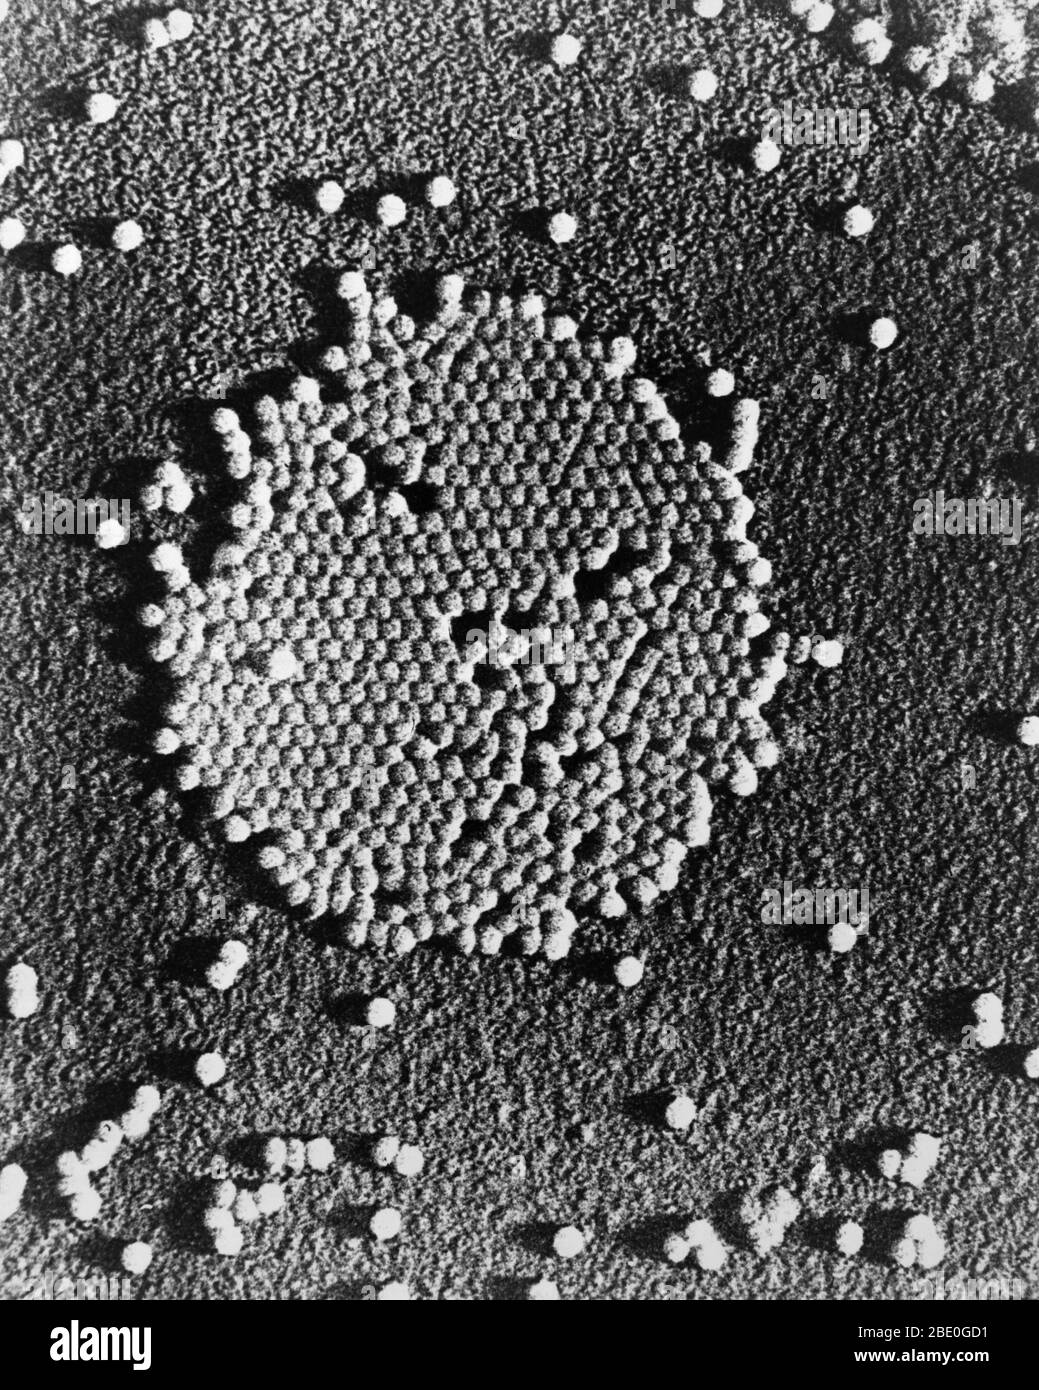 Transmission Electron Micrograph (TEM) of poliovirus. Poliovirus, the causative agent of poliomyelitis (commonly known as polio), is a human enterovirus and member of the family of Picornaviridae. Poliovirus is composed of an RNA genome and a protein capsid. Poliovirus is a positive-stranded RNA virus. Poliovirus is structurally similar to other human enteroviruses (coxsackieviruses, echoviruses, and rhinoviruses), which also use immunoglobulin-like molecules to recognize and enter host cells. Poliovirus was first isolated in 1909 by Karl Landsteiner and Erwin Popper. In 1981, the poliovirus g Stock Photo